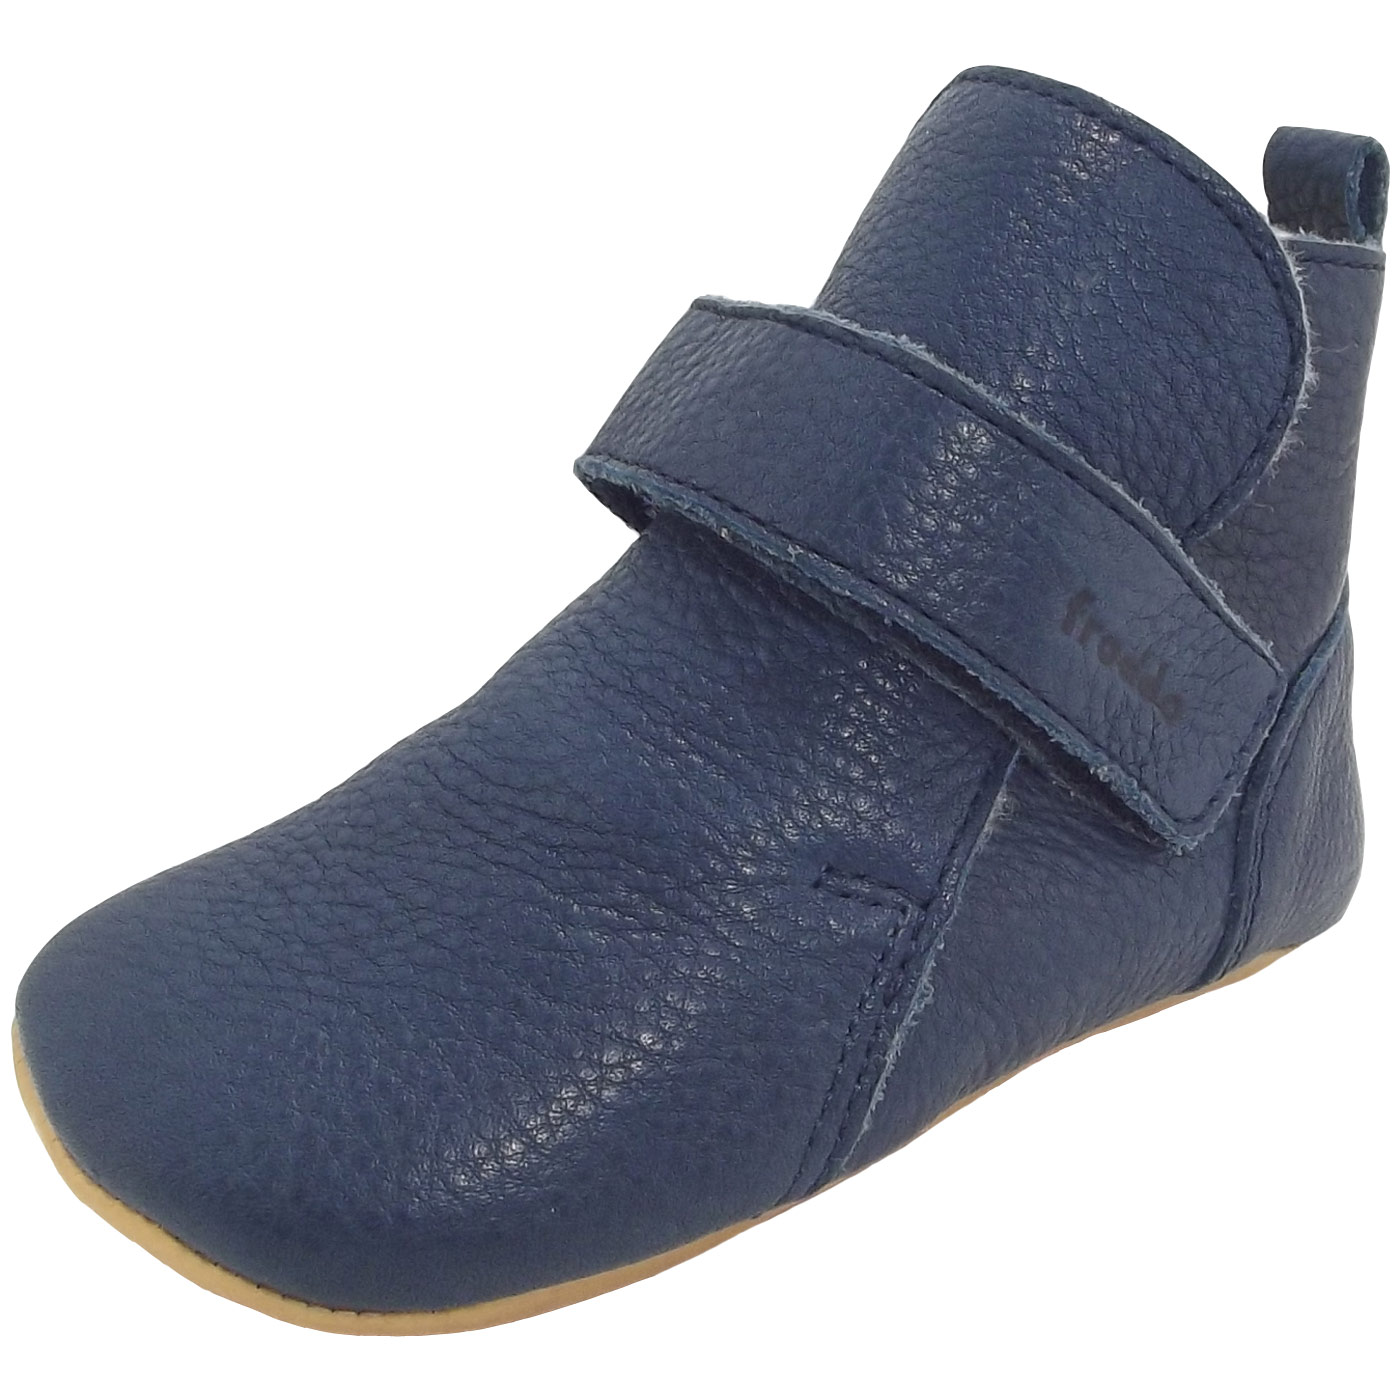 Shoes dark blue | Baby - Crawling Shoes 